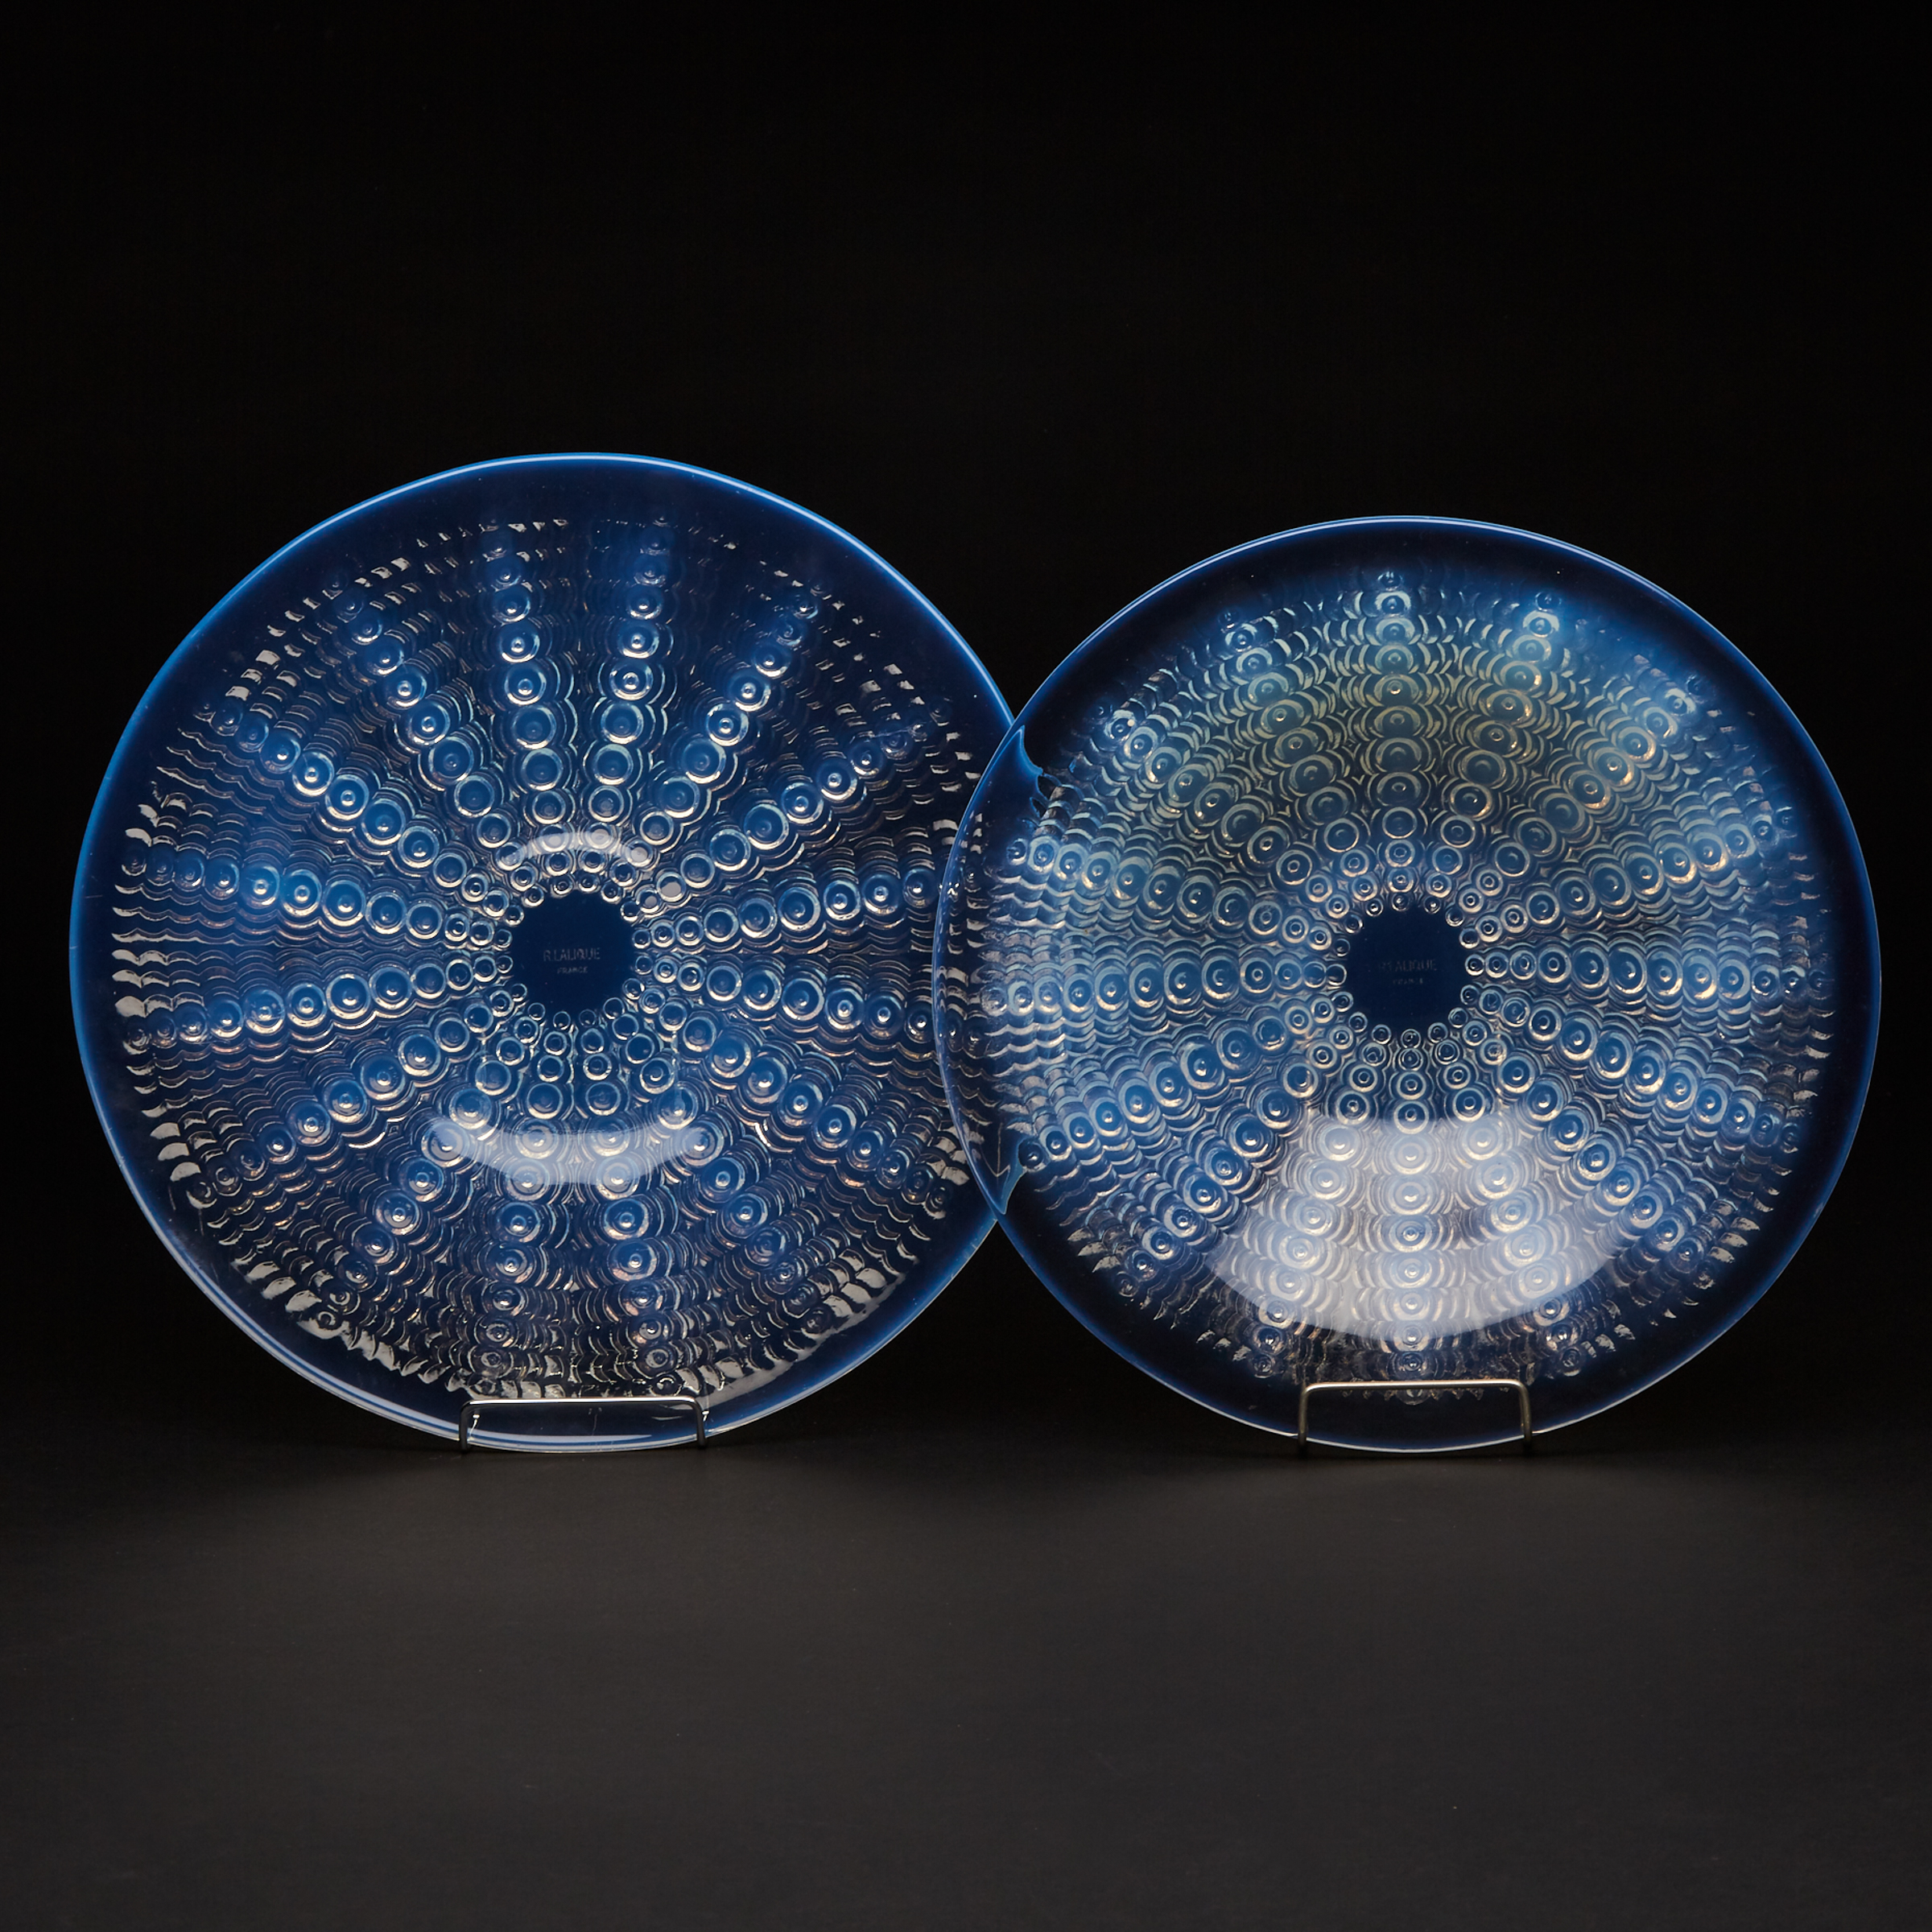 ‘Oursins No. 2’, Lalique Opalescent Glass Plate and a Shallow Bowl, c.1935